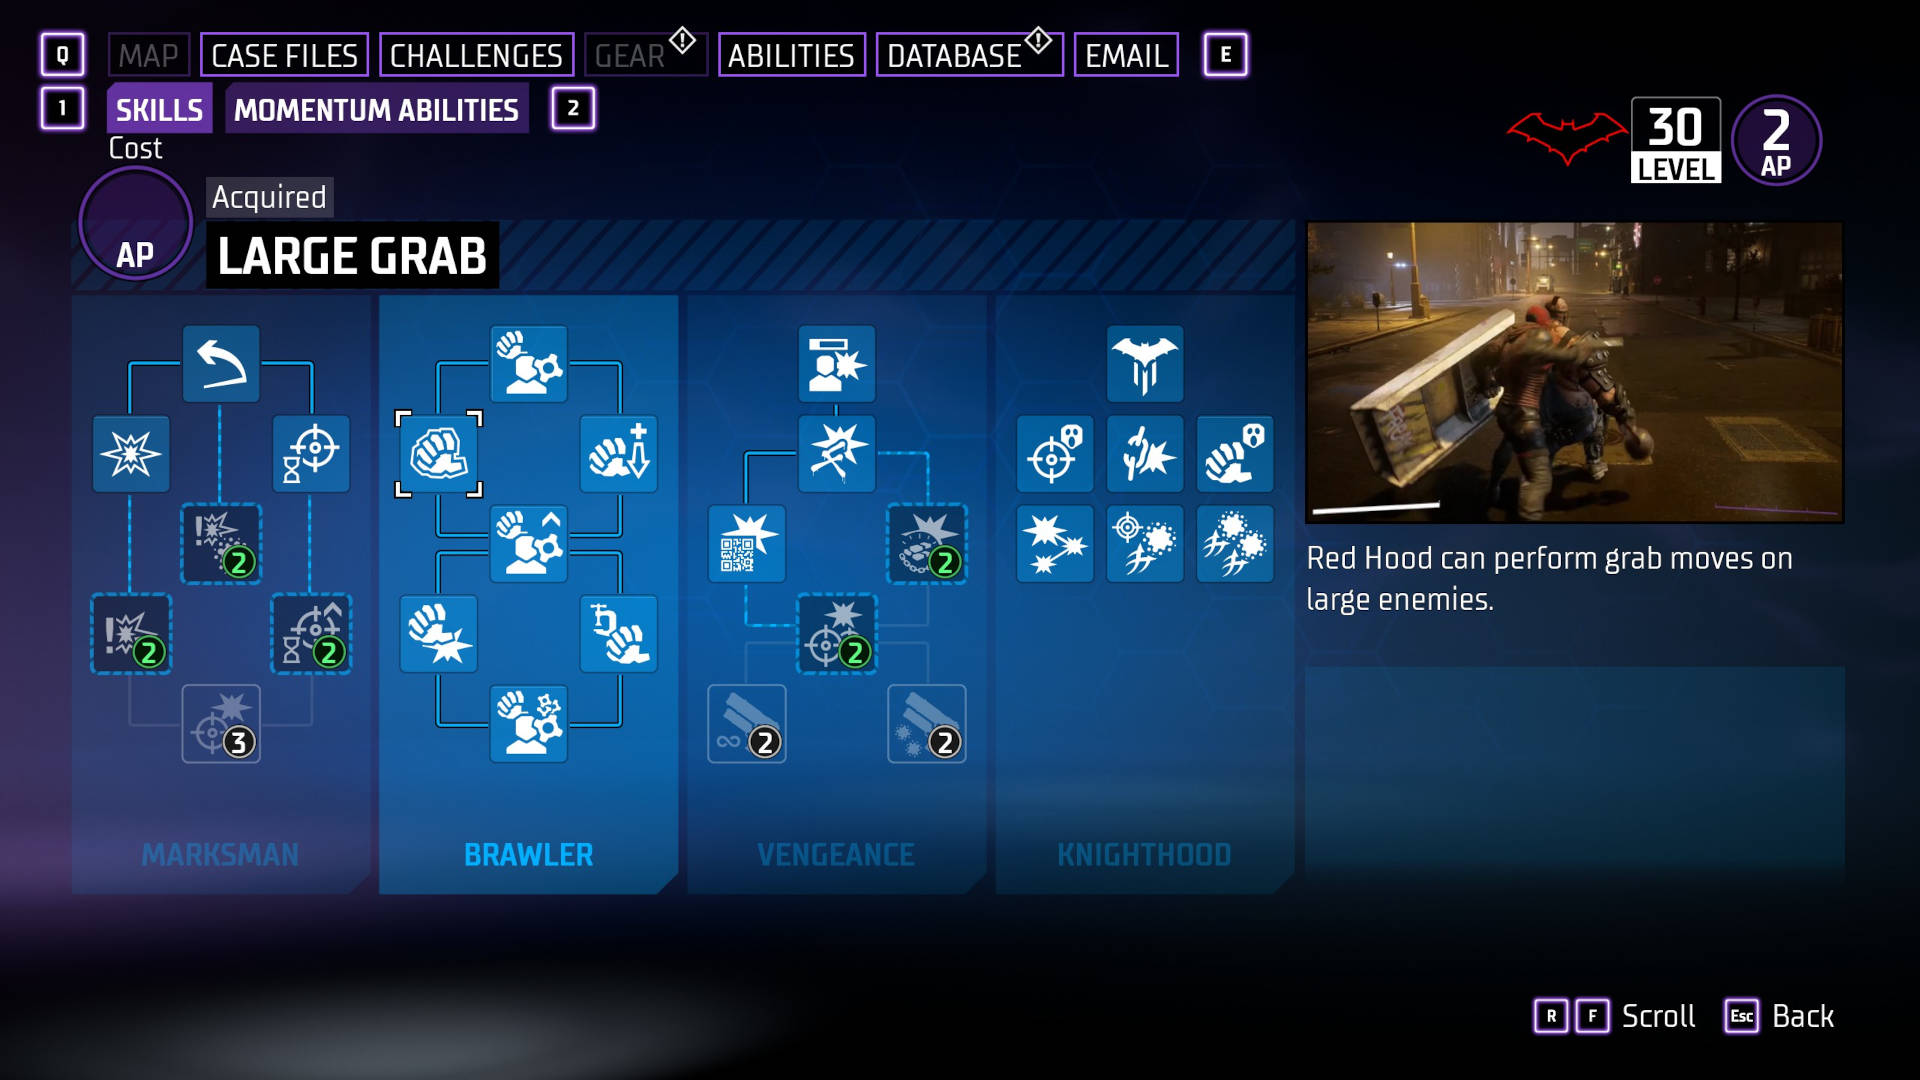 Gotham Knights abilities: Red Hood's ability tree. The image on the right side of the screen shows Large Grab in action.